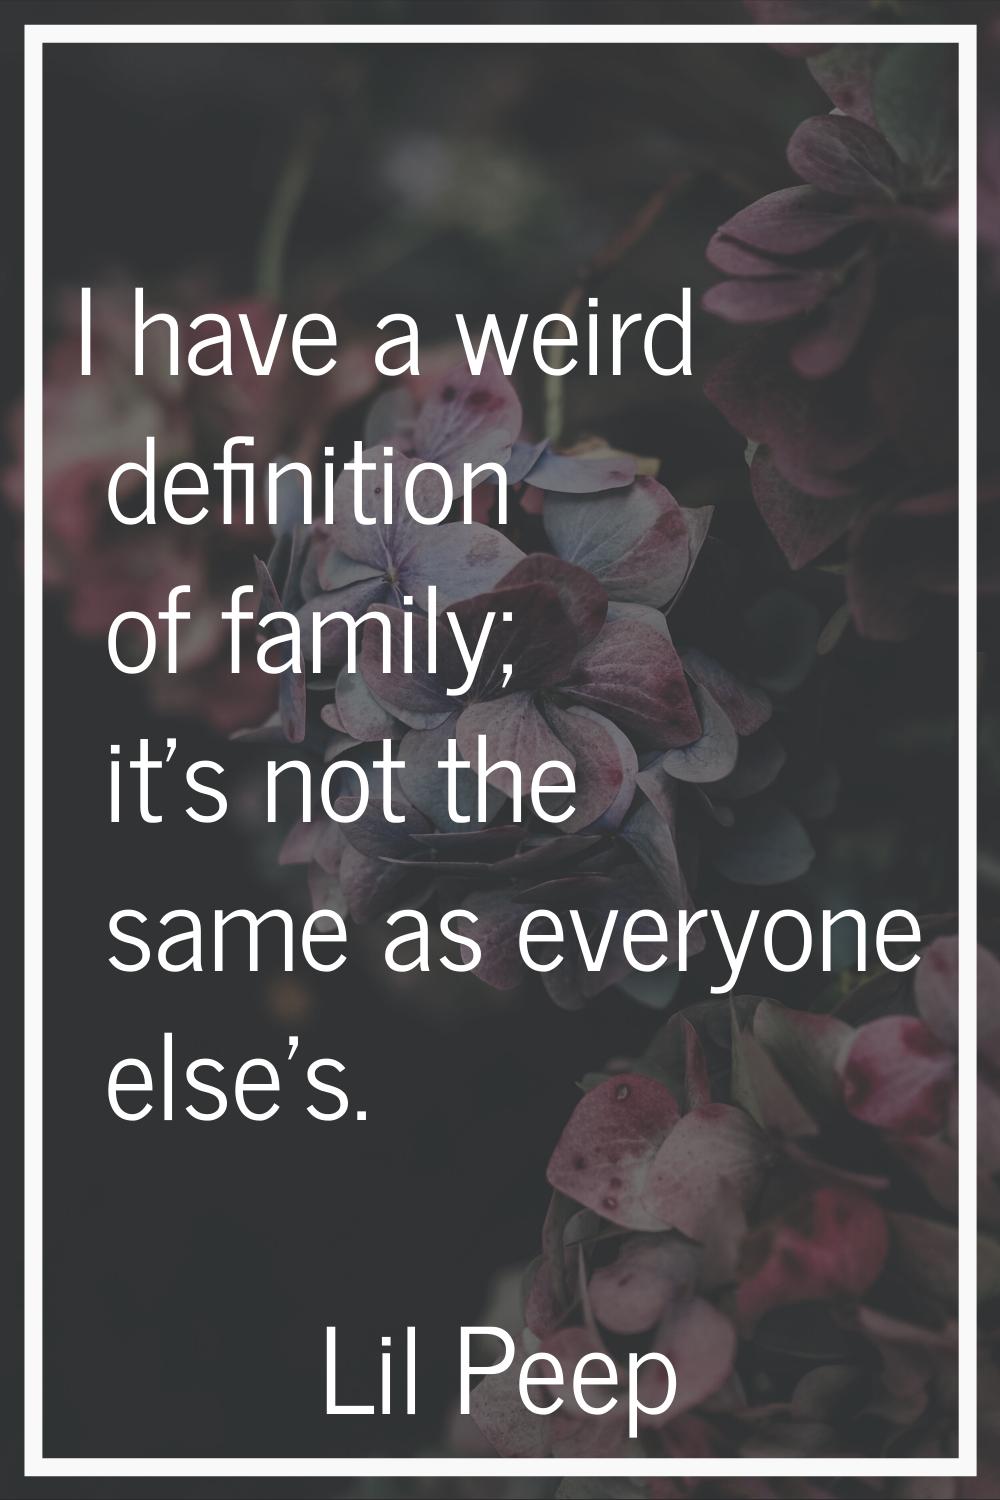 I have a weird definition of family; it's not the same as everyone else's.